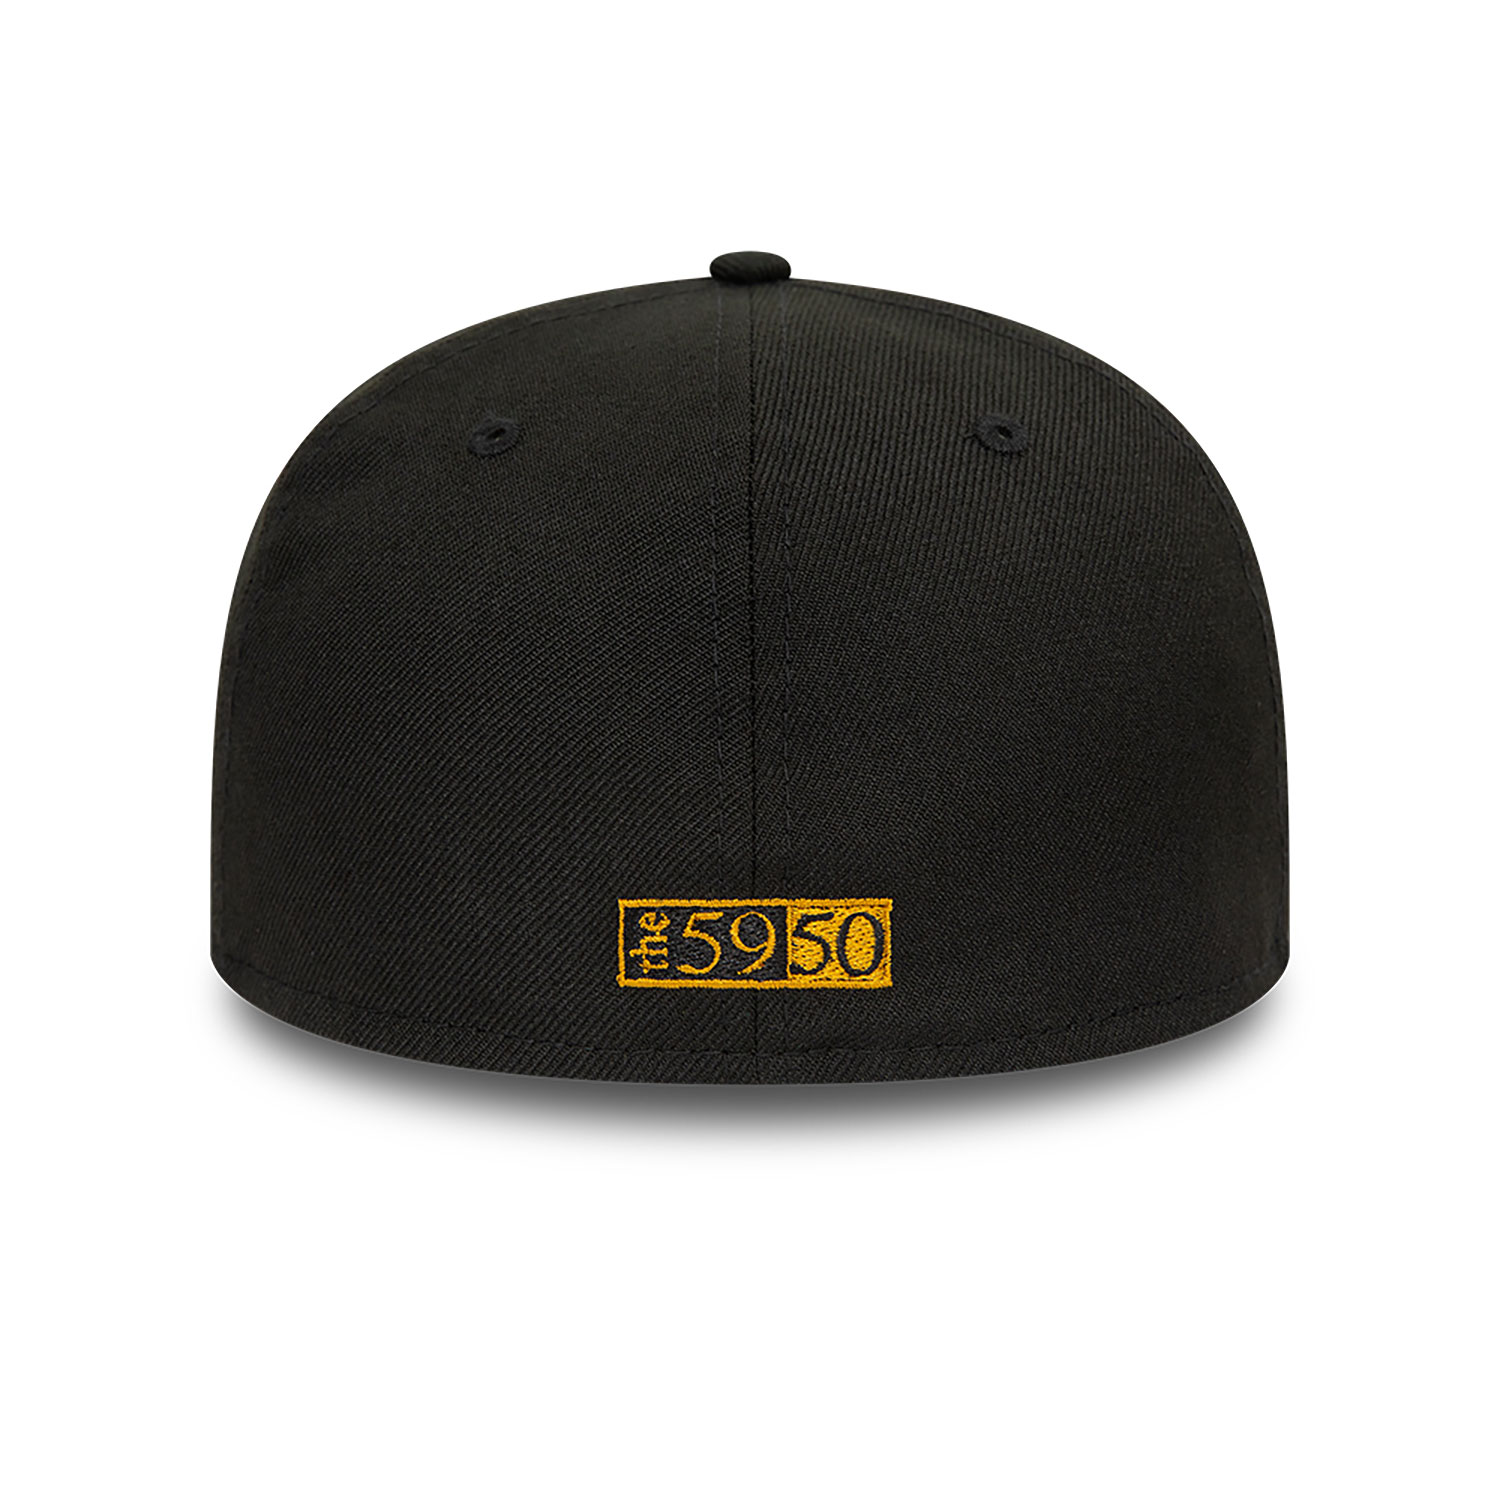 New Era 7 1/4 59FIFTY Day Black 59FIFTY Fitted Cap